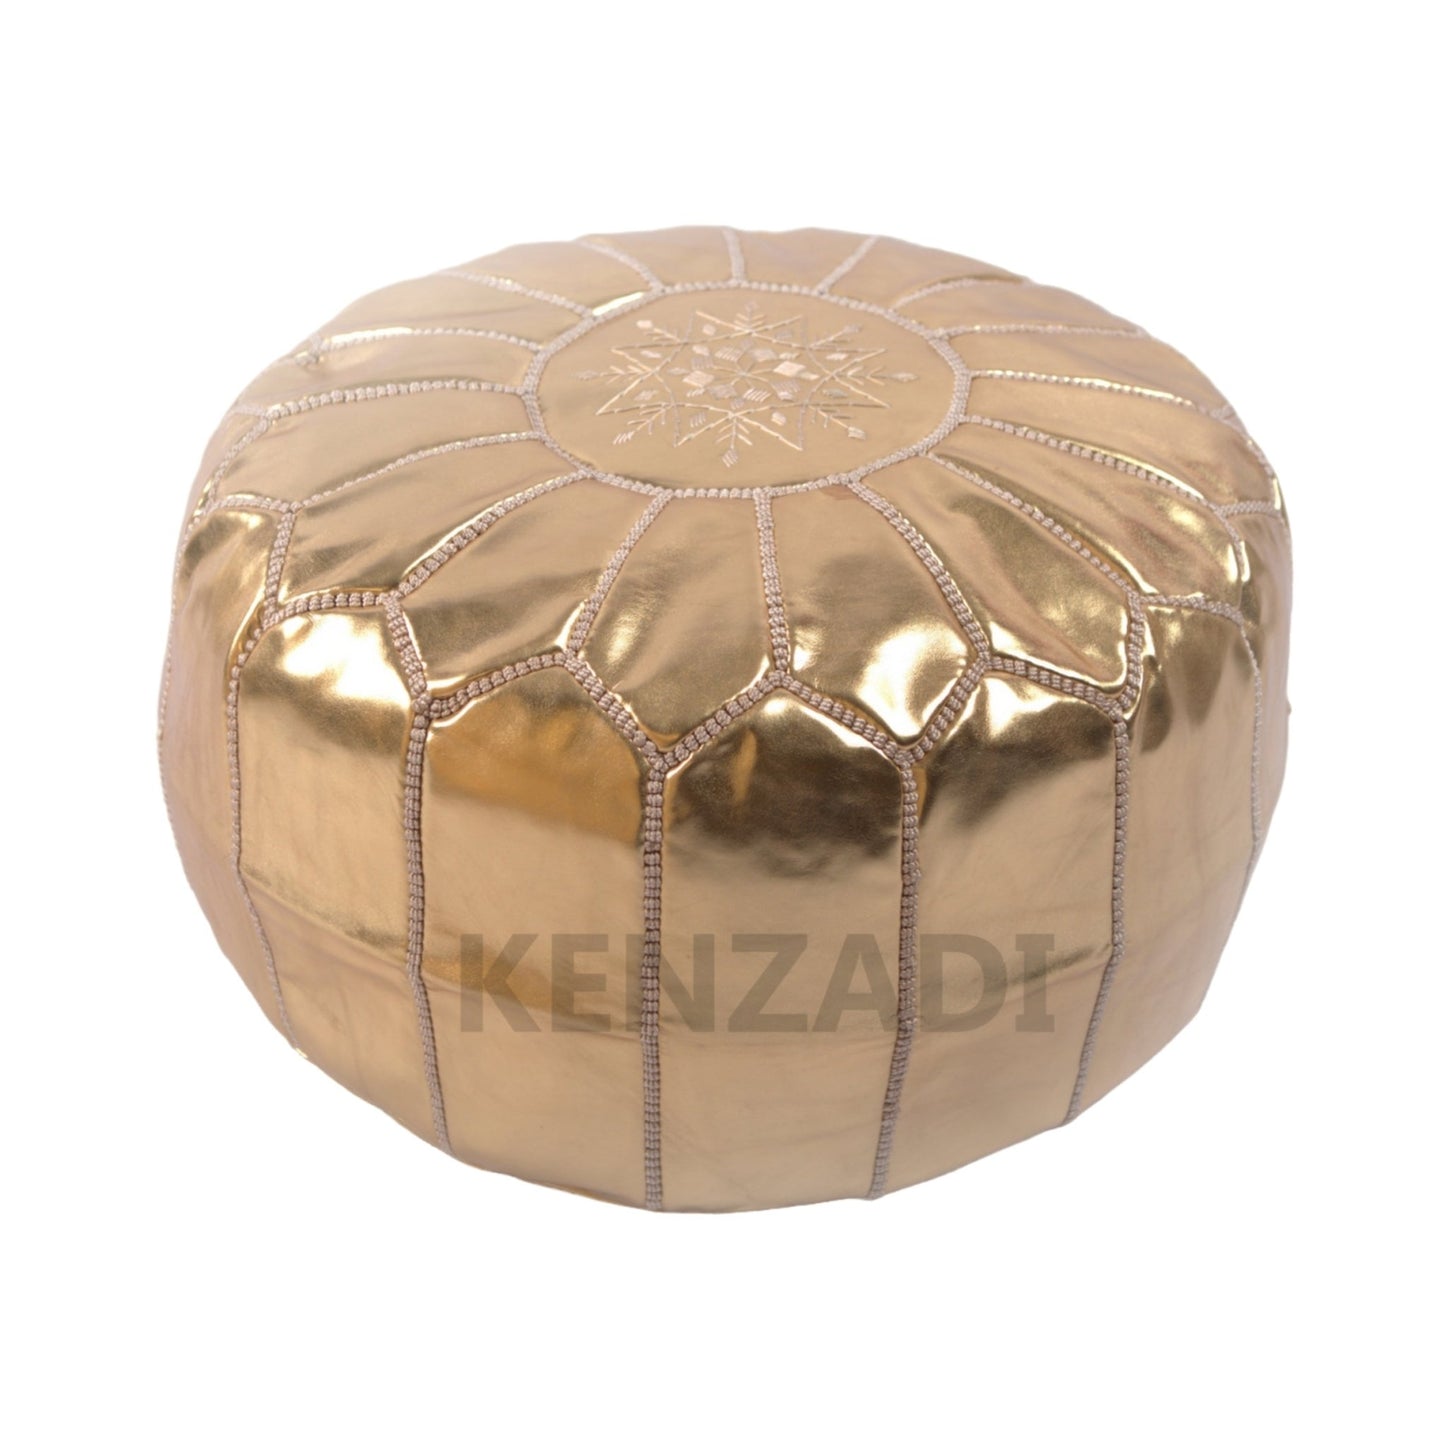 Moroccan leather Pouf, round Pouf, berber Pouf, Gold Pouf with Beige embroidery by Kenzadi - Handmade by My Poufs